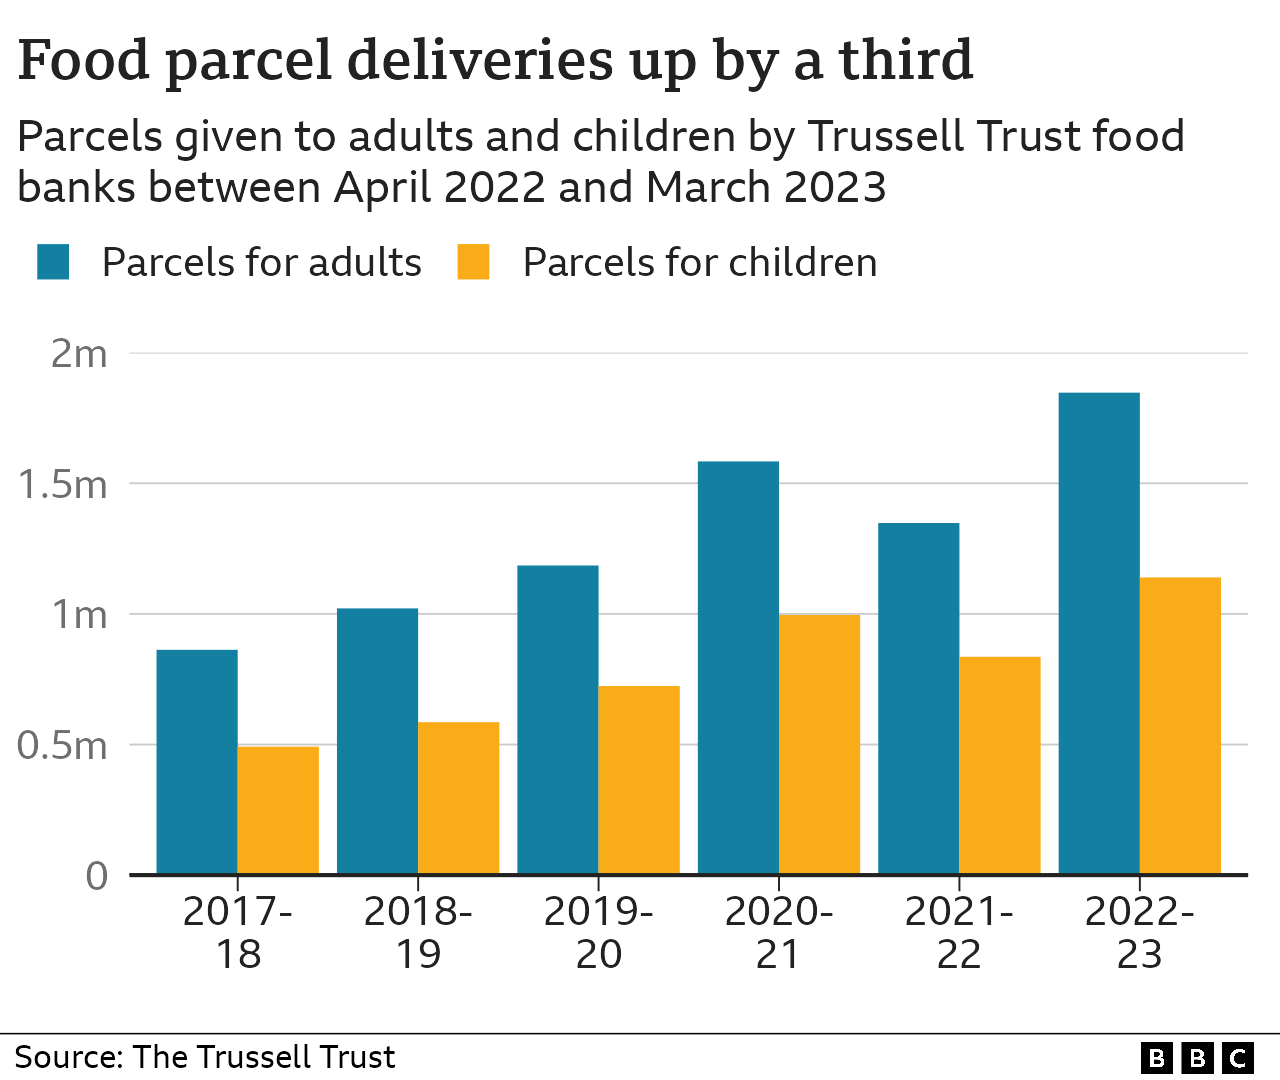 Chart showing food parcels given out by the Trussell Trust between 2017 and 2022. In teal, you can see parcels for adults rising from under one million parcels in 2017, to almost two million in 2022. In yellow, you can see parcels for children rising from 0.5 million in 2017, to over one million in 2022.